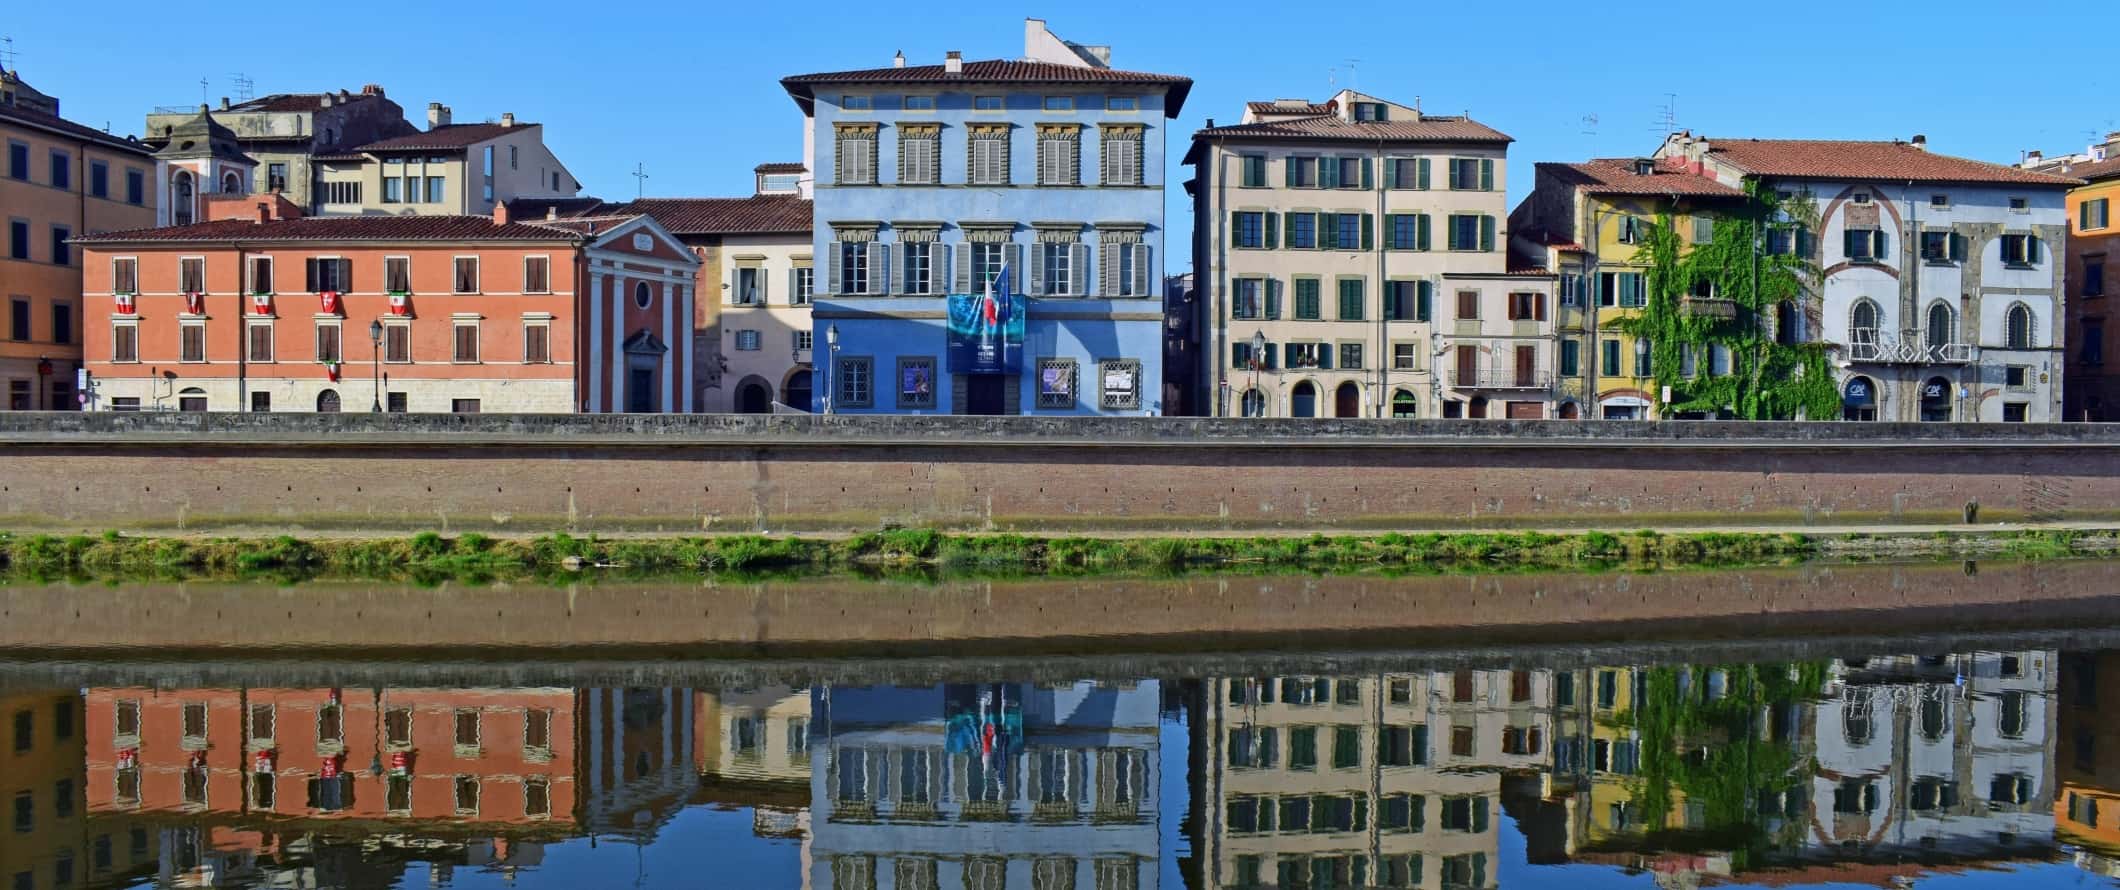 Brightly colored historic buildings, including the blue-colored art center, Palazzo Blu, along the banks of the Arno River in Pisa, Italy.